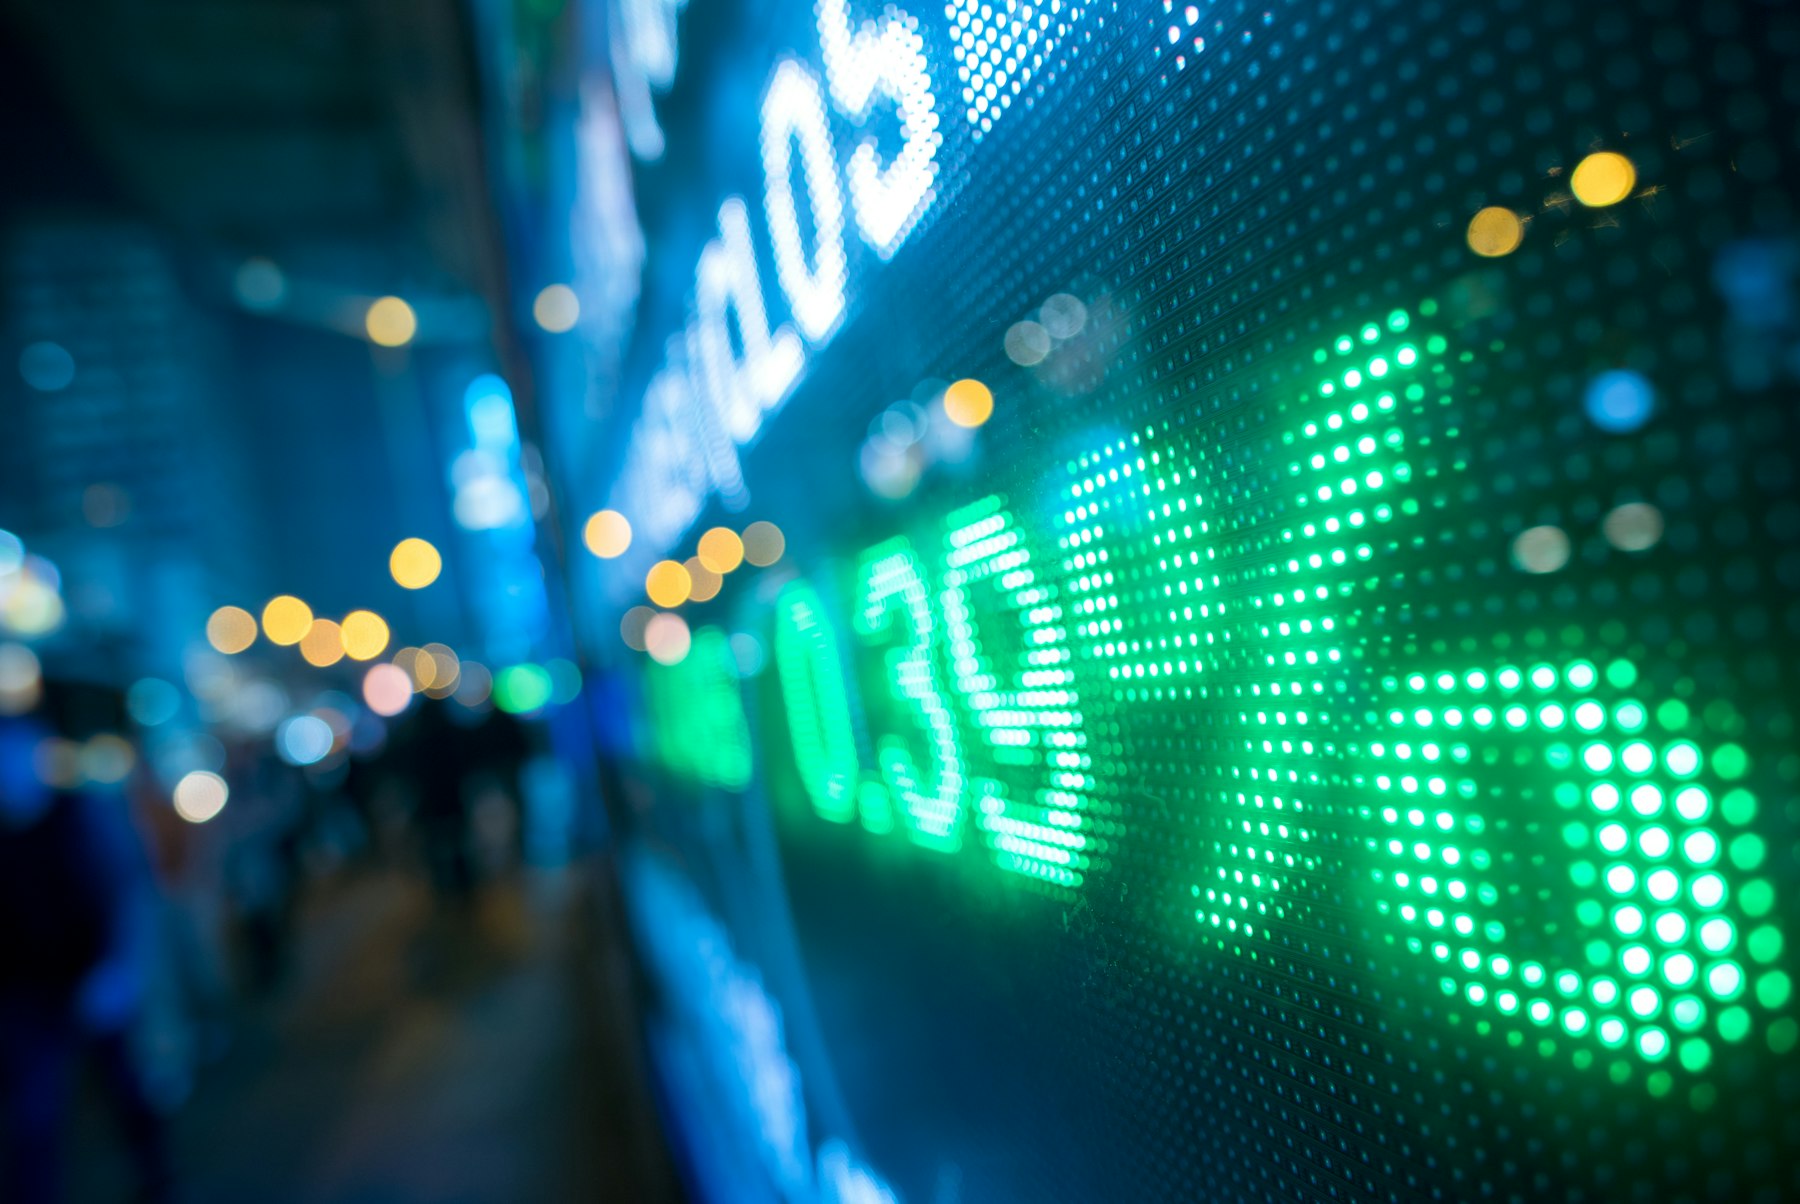 The photo depicts a display stock market numbers with defocused street lights background